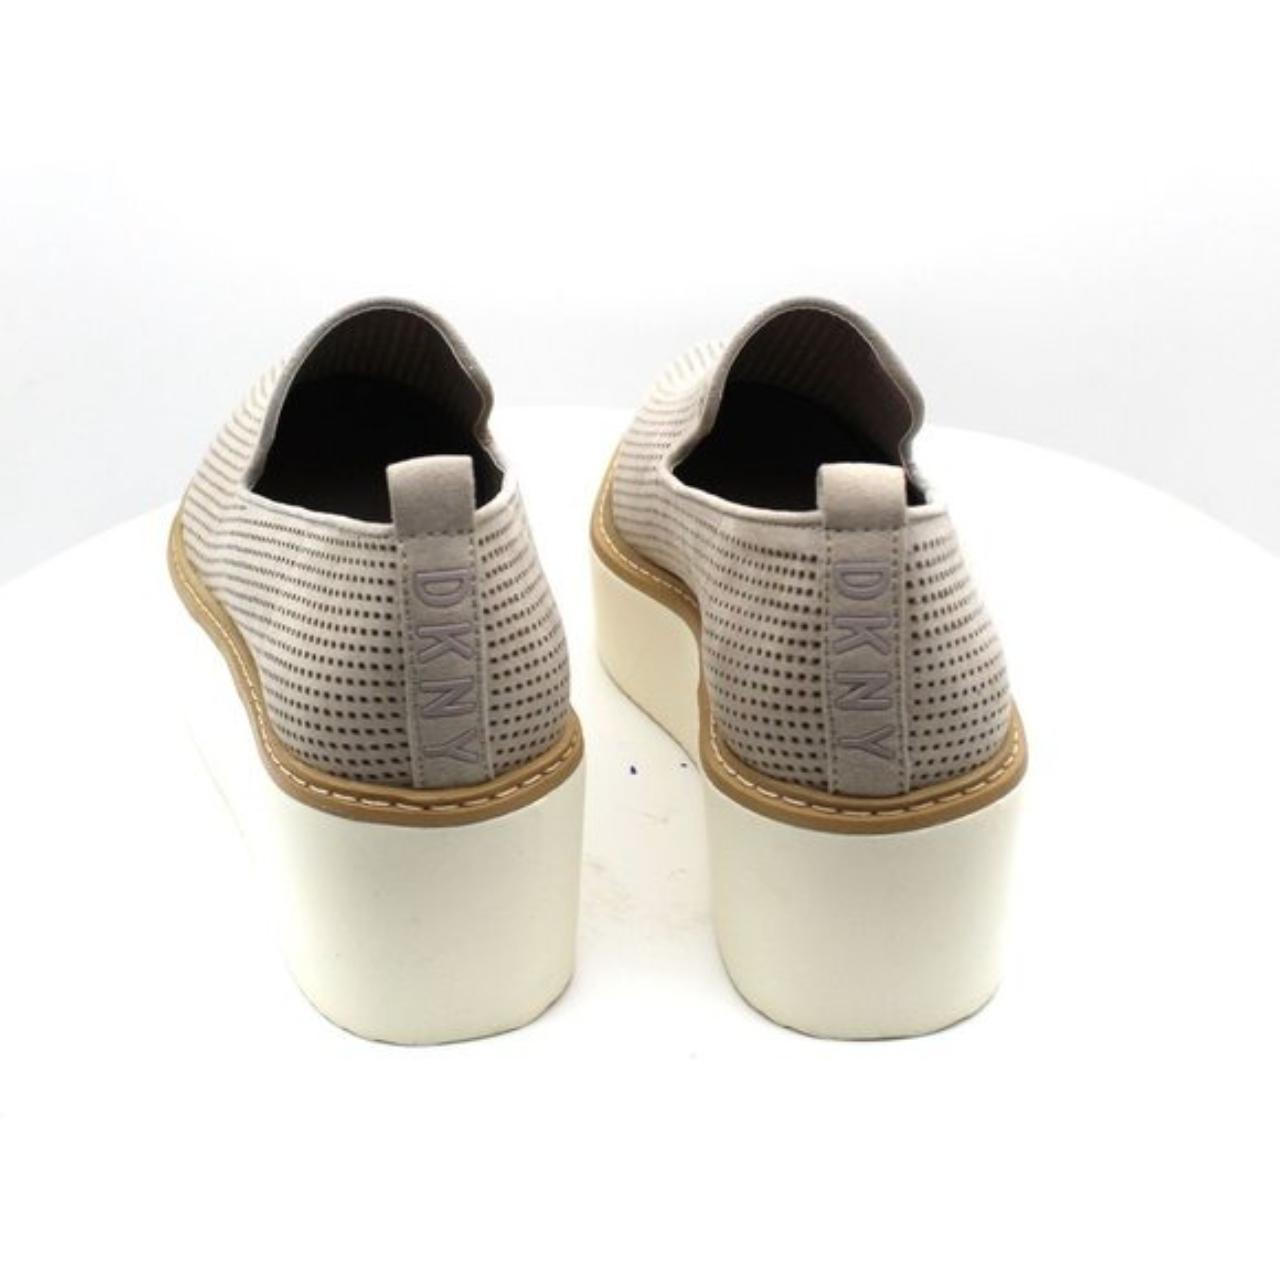 Product Image 4 - Dkny Bari Platform Sneakers

Add contemporary